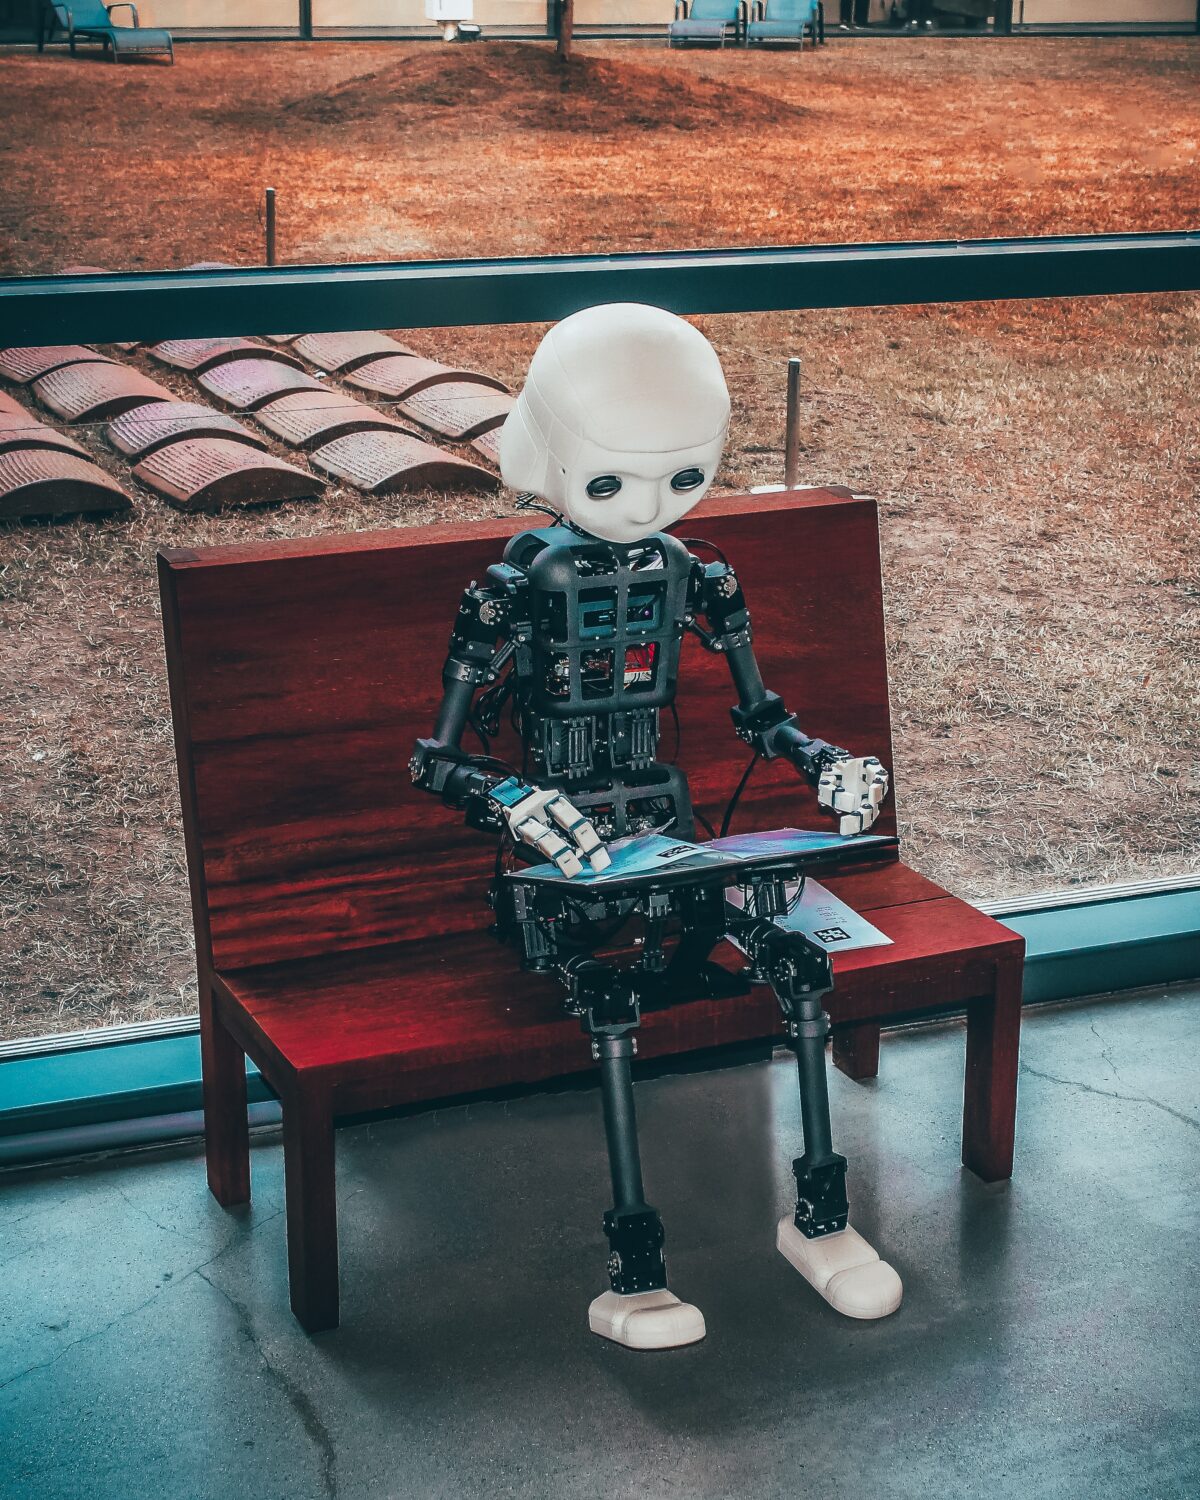 Robot sitting on a bench typing on an iPad